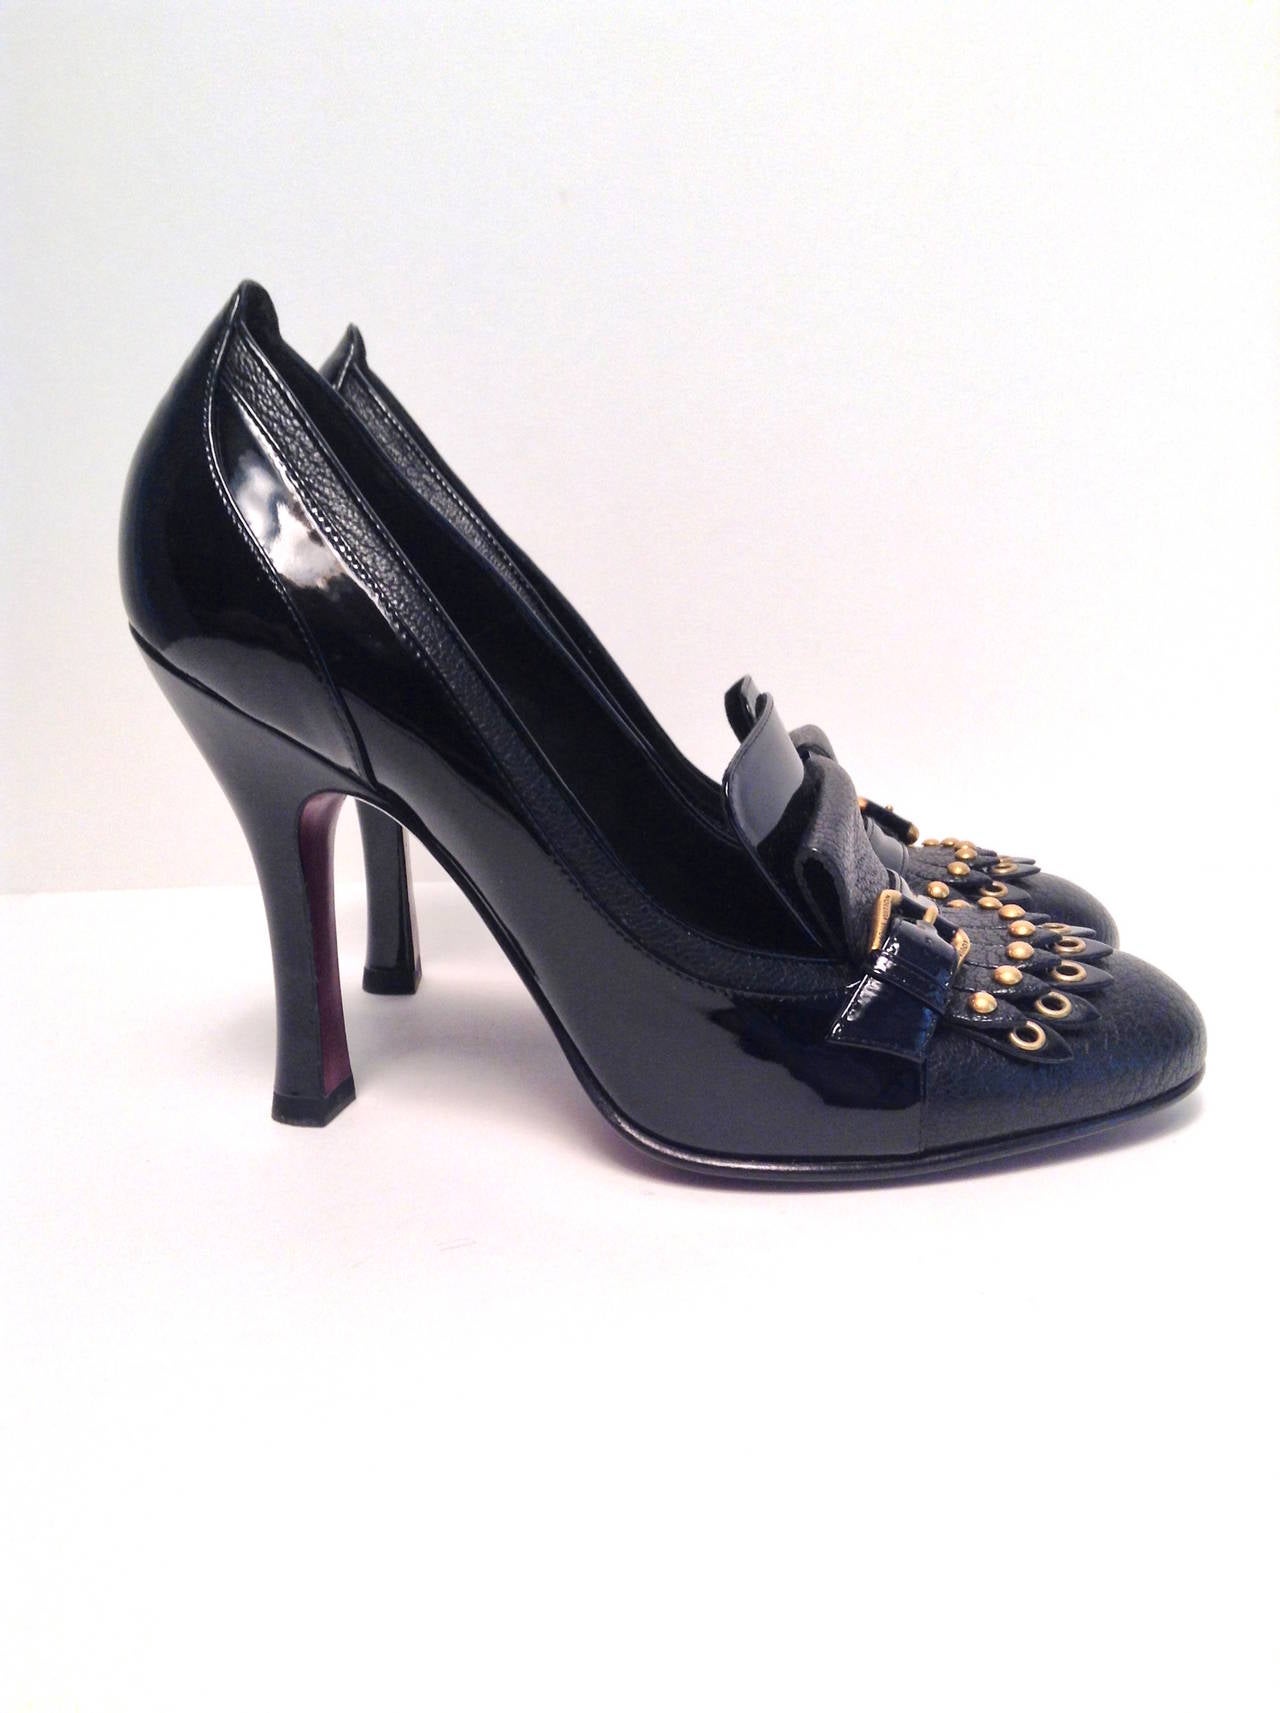 Louis Vuitton black patent and leather pumps. A great stand out heel that looks great paired with a business or evening attire. 

Heel measures 4.5